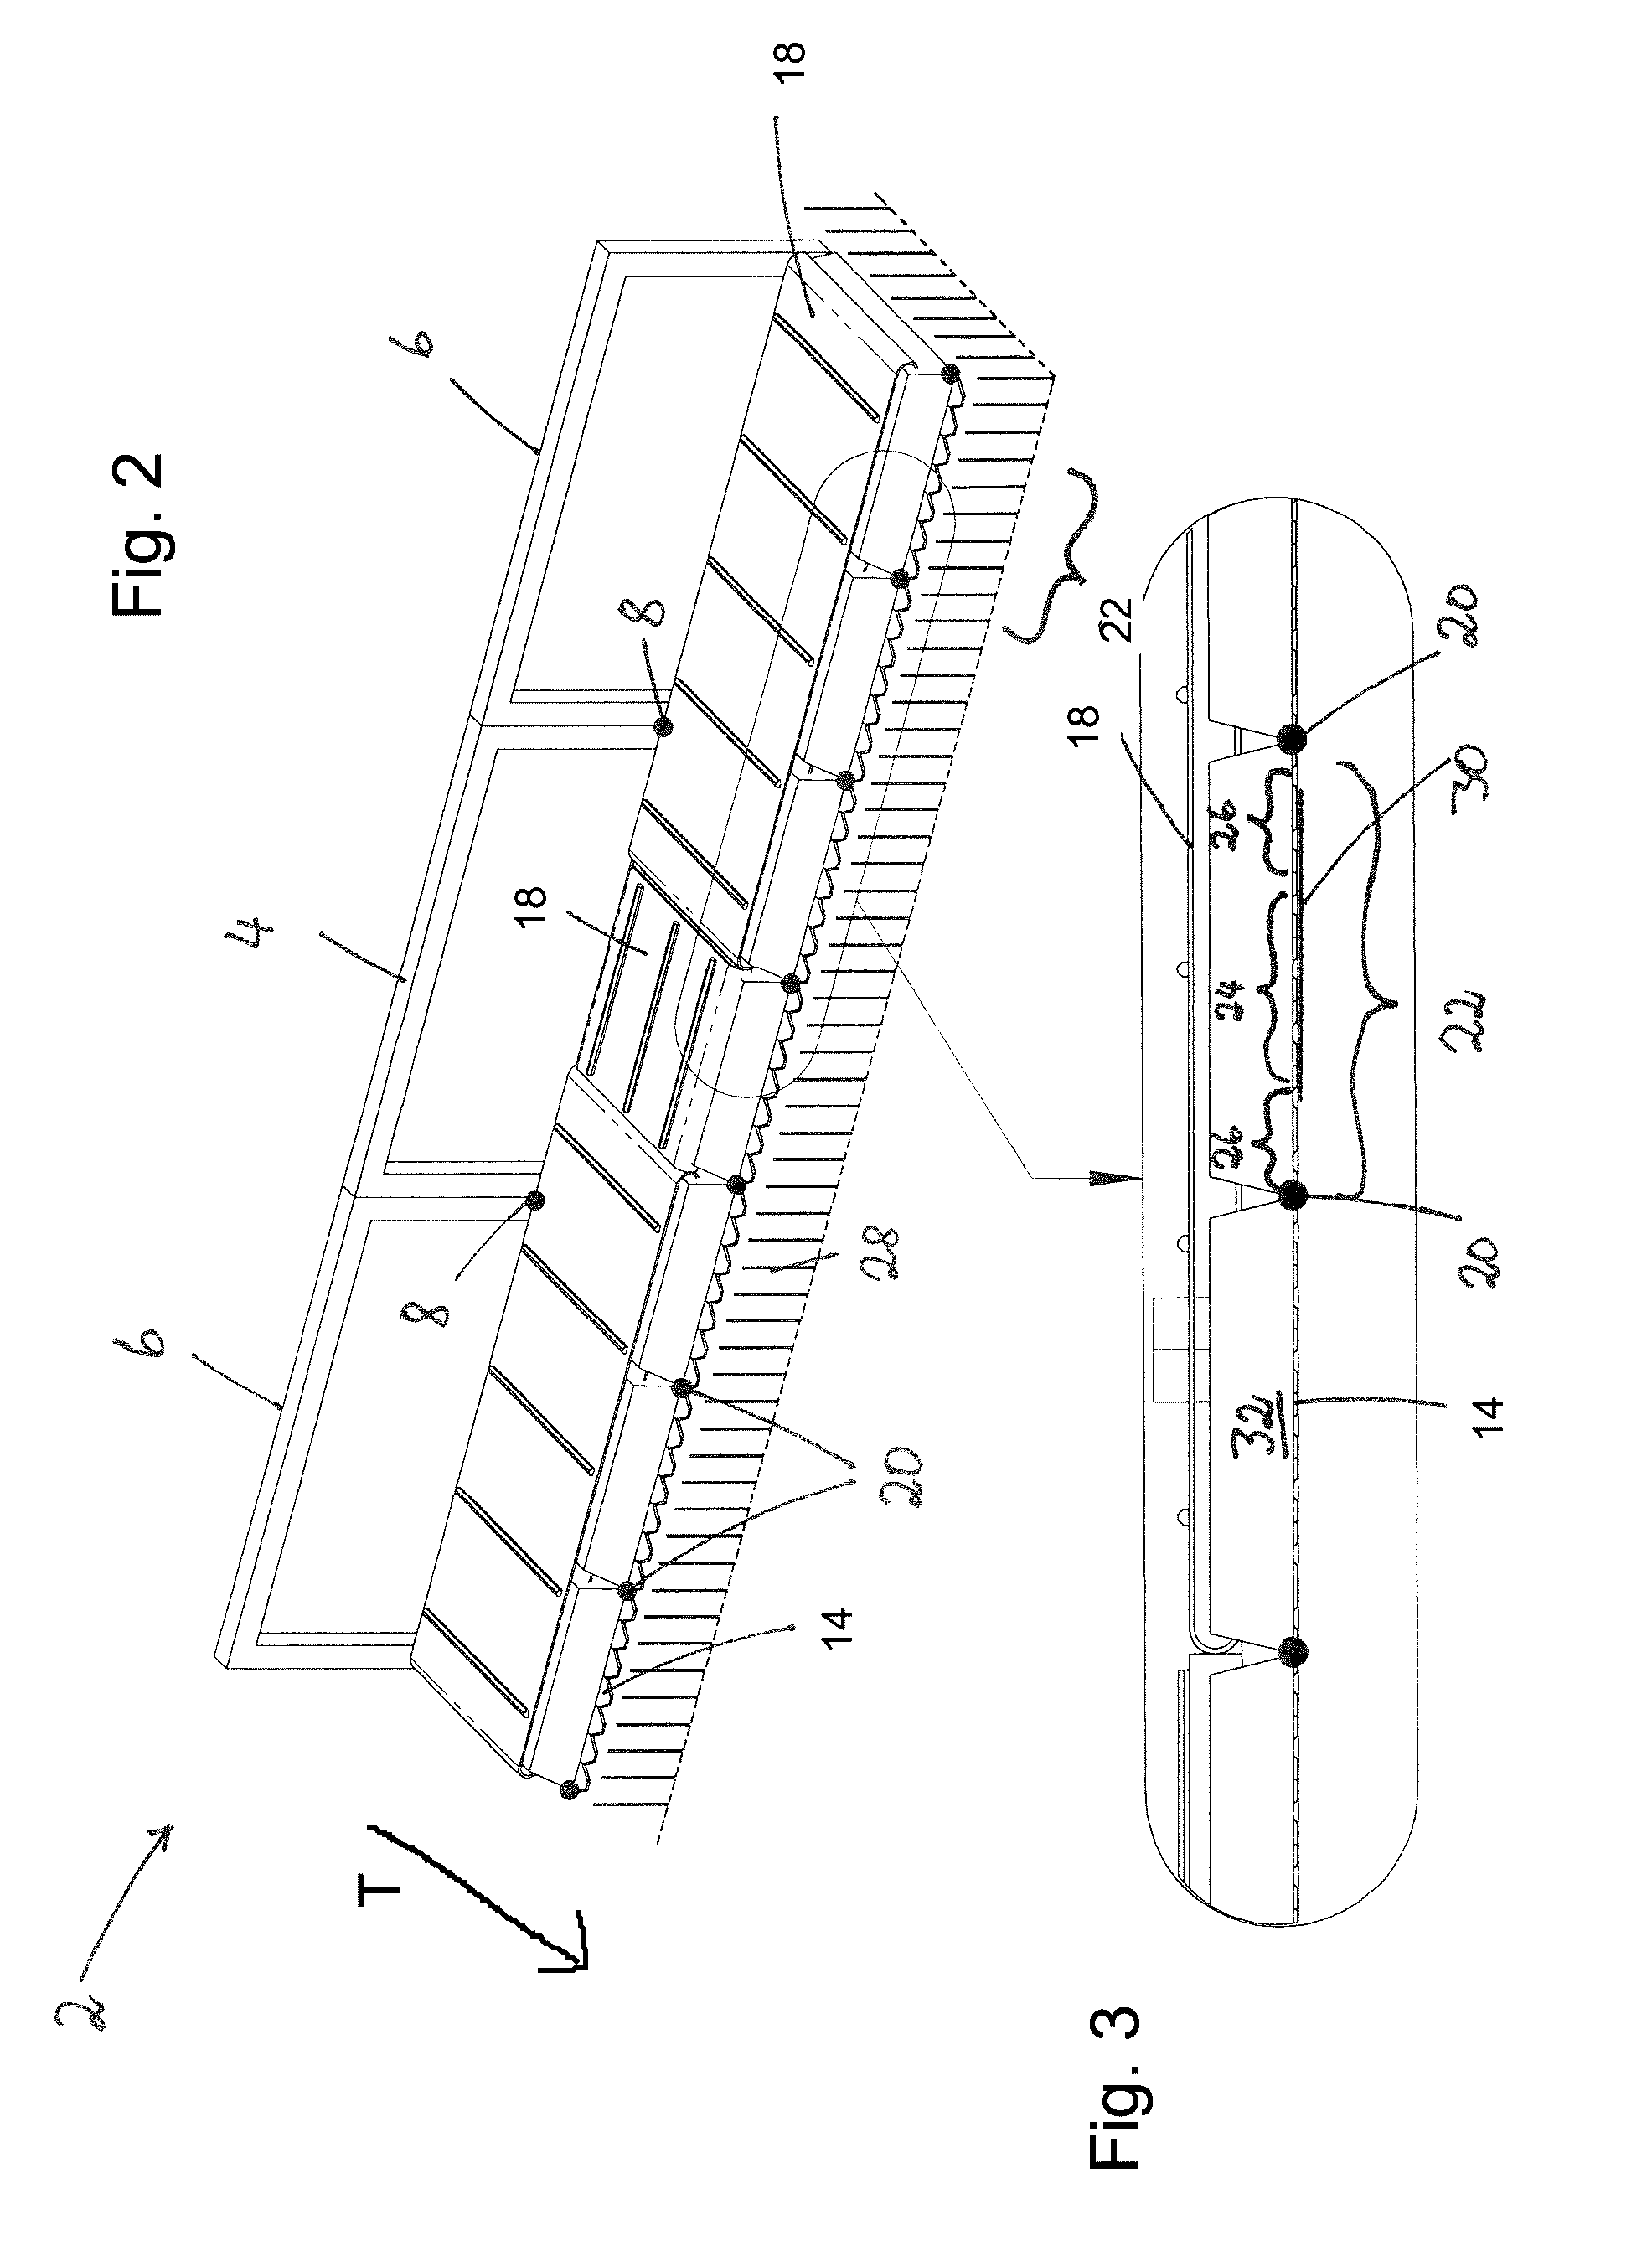 Draper platform with center section and lateral sections arranged laterally to the center section